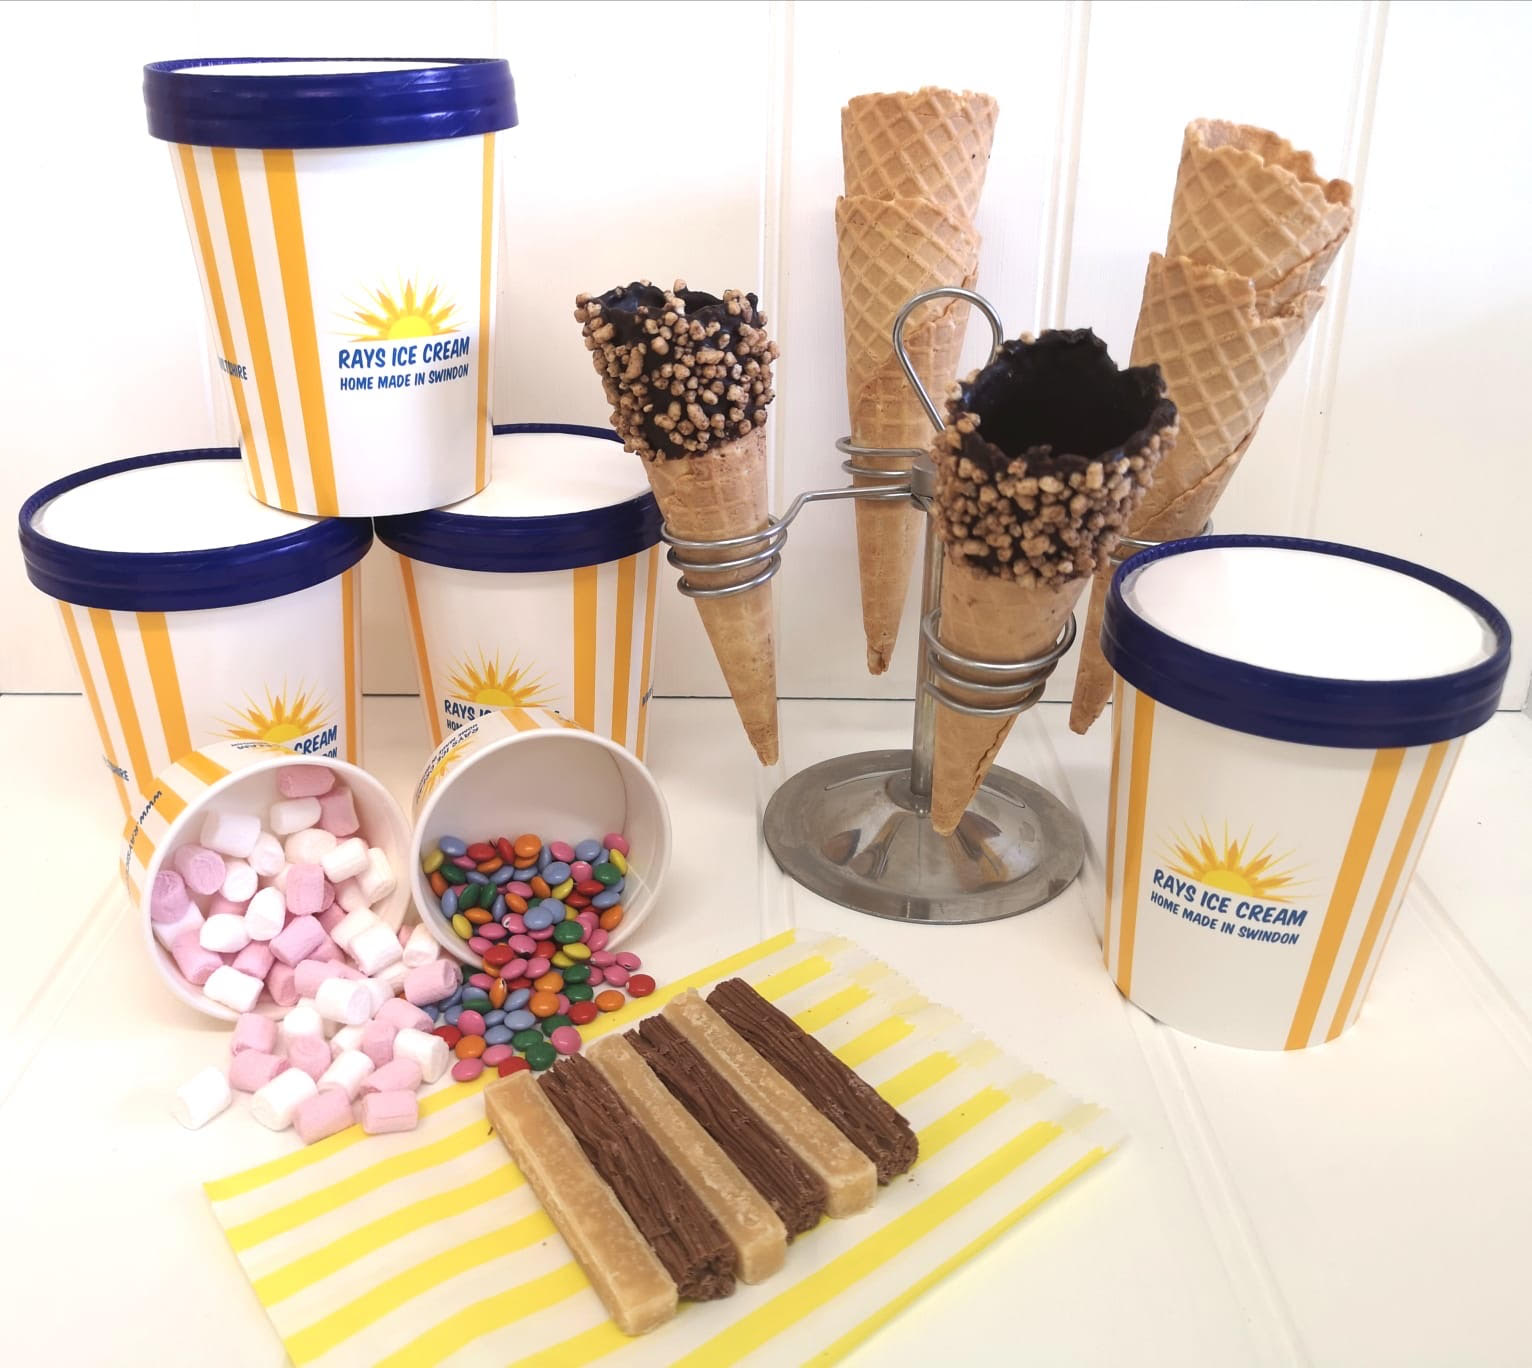 Rays Ice Cream launches new, temporary, home delivery service